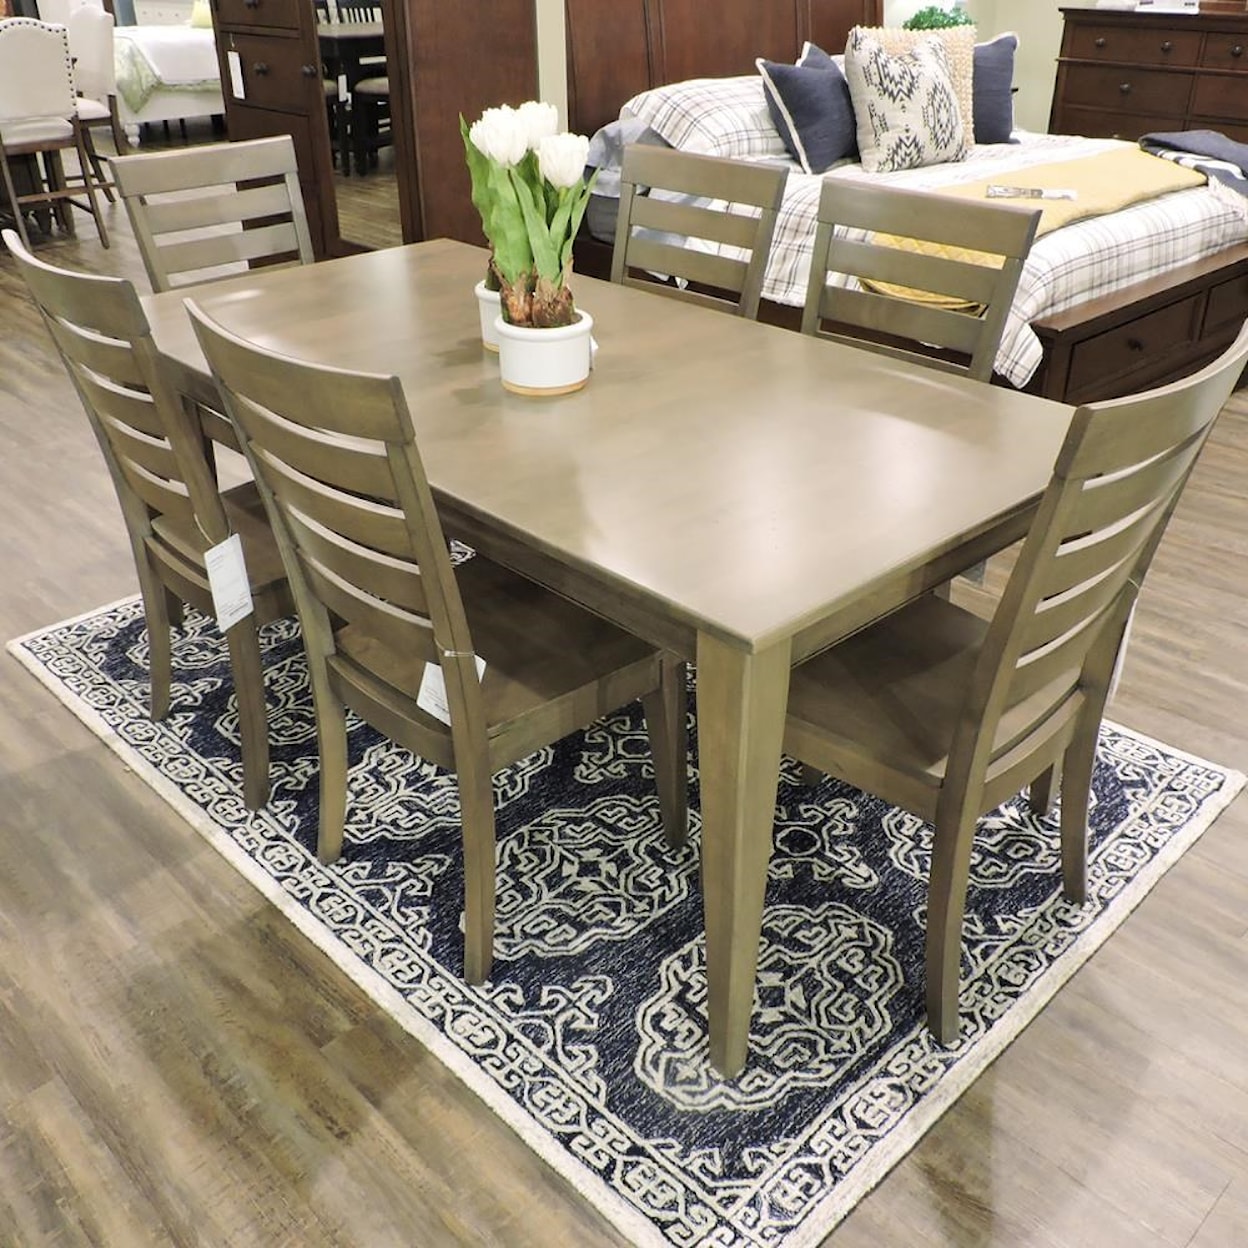 Canadel Gourmet Customizable Dining Table